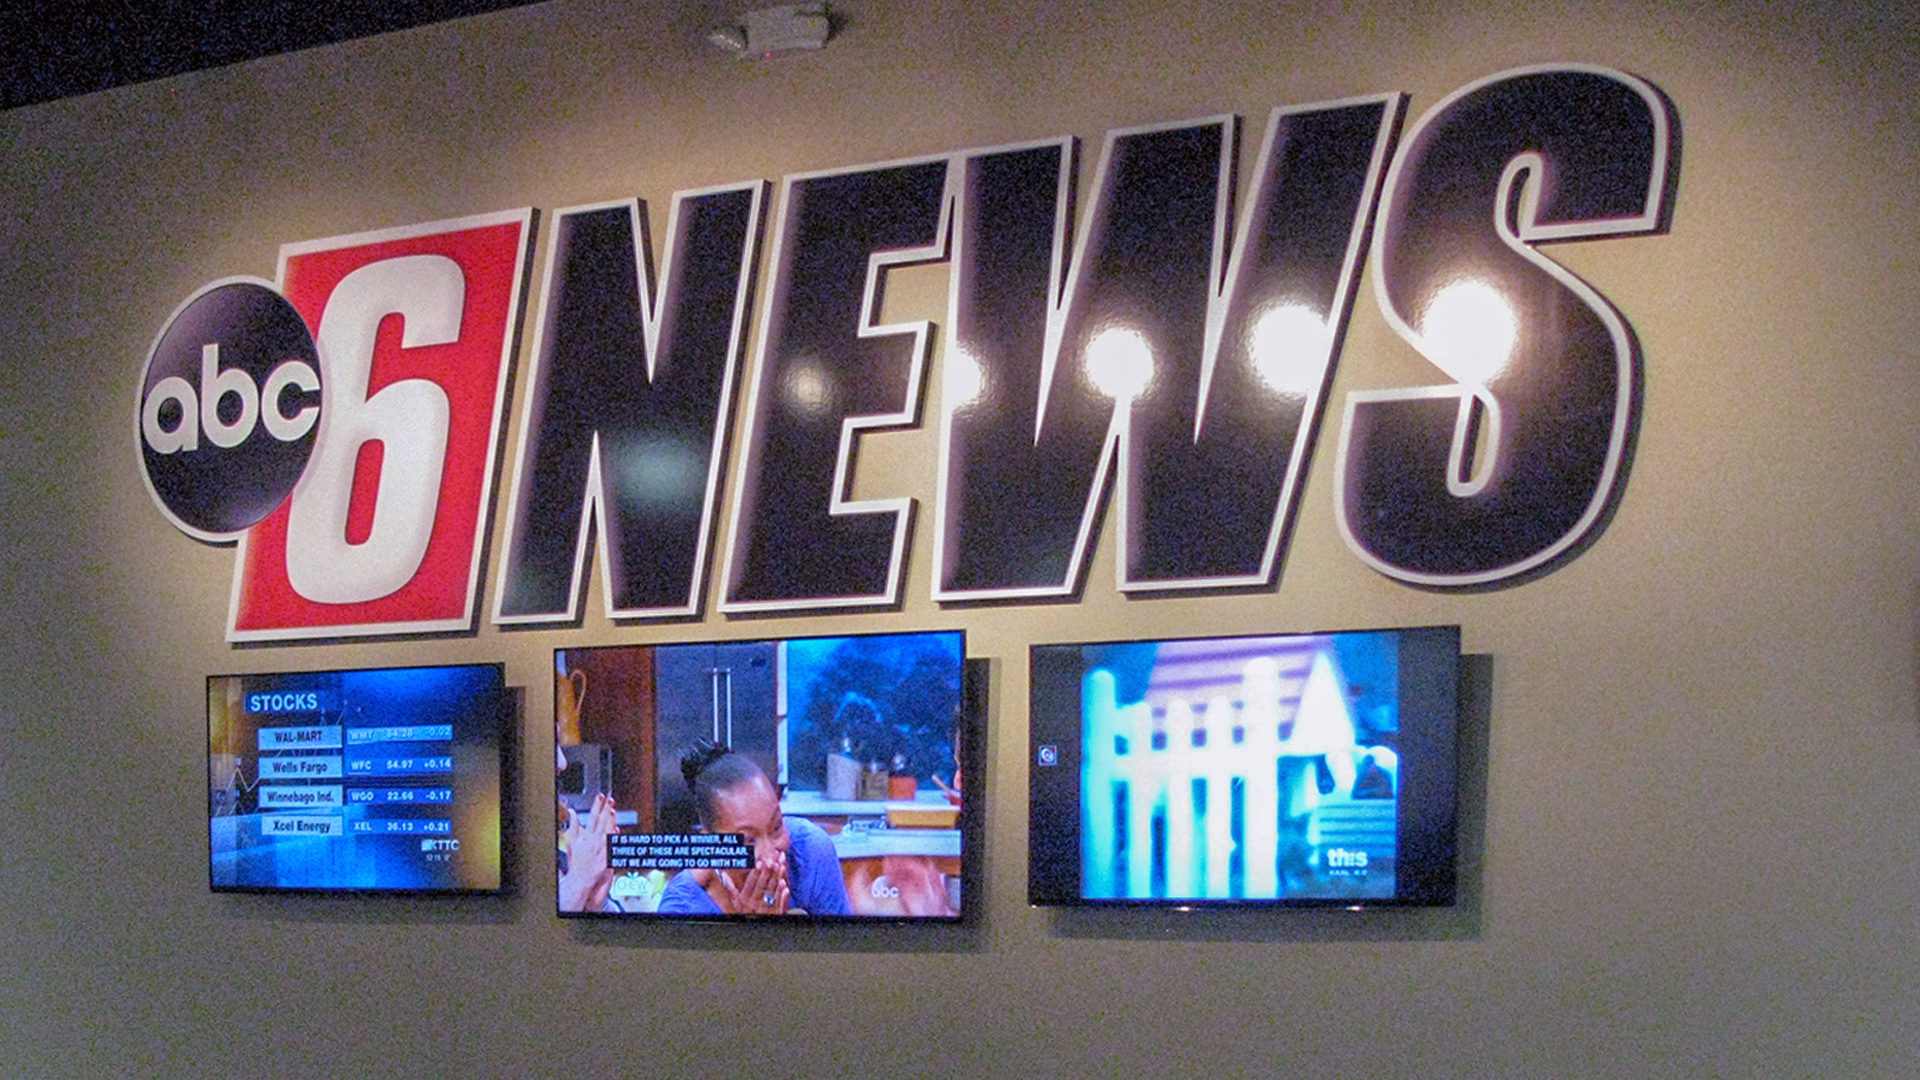 KAAL TV Studio Rochester ABC 6 News Interior Logo Wall with Video Screens